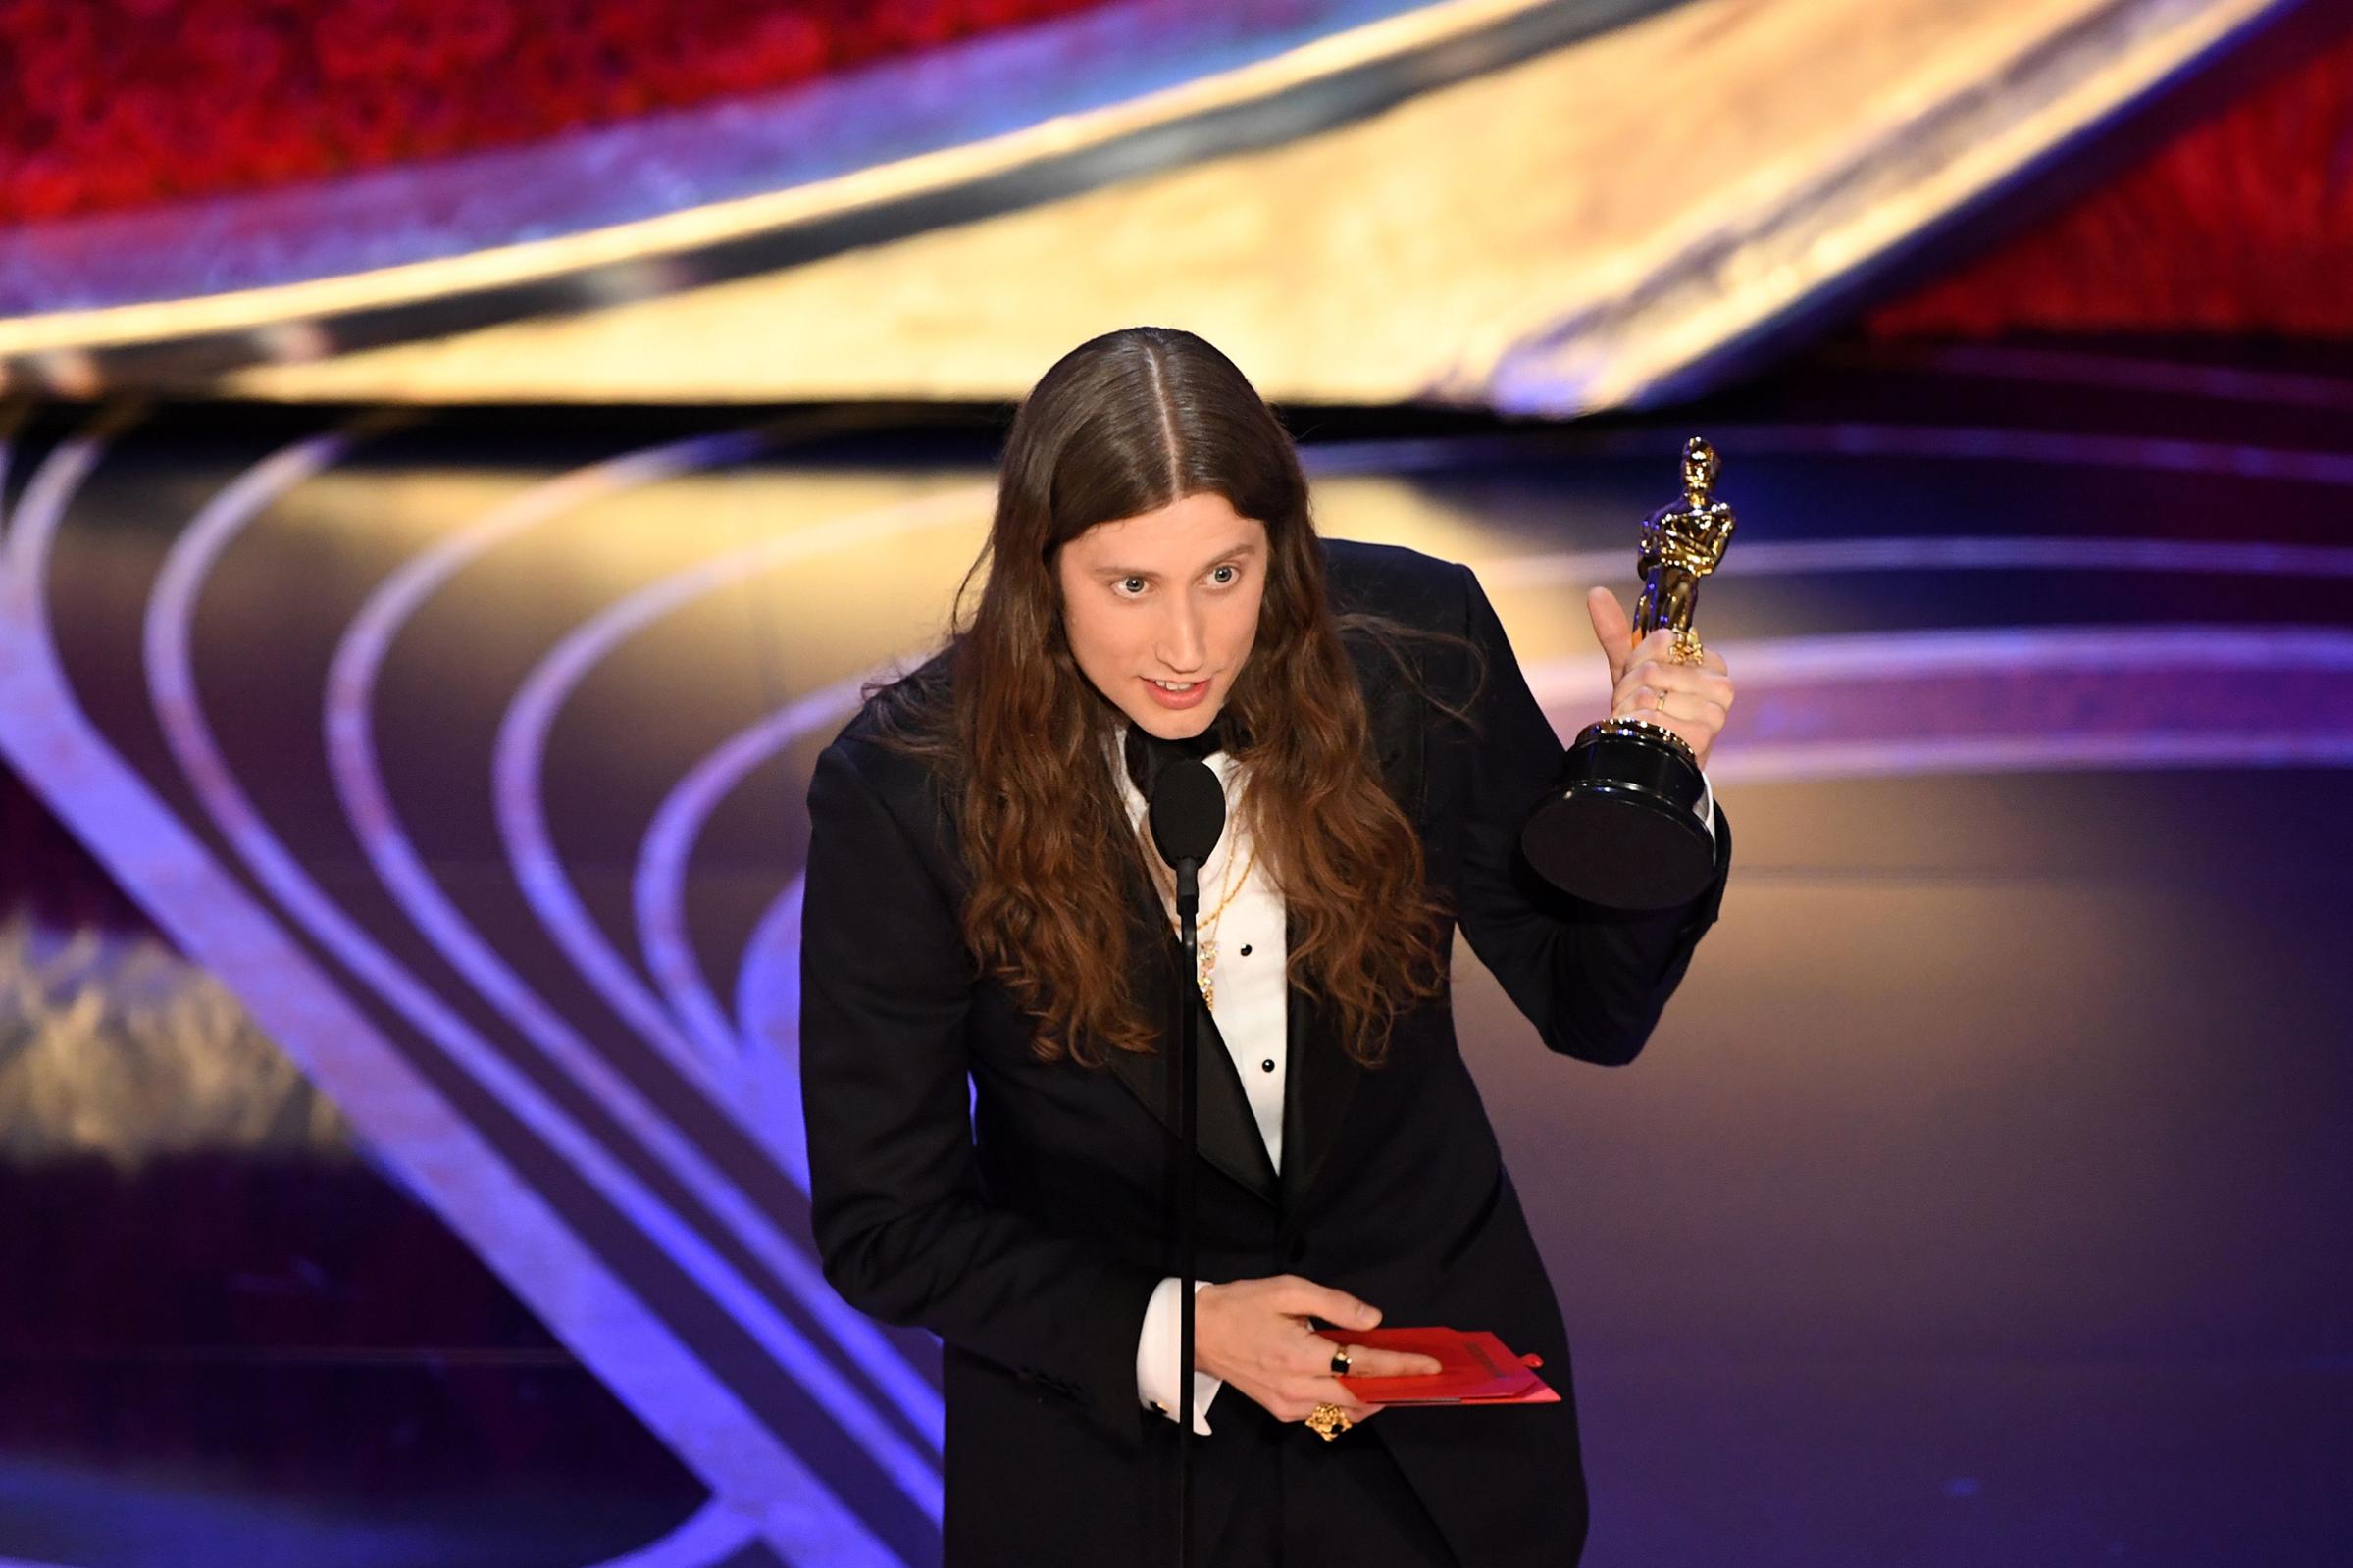 Best Original Score nominee for "Black Panther" composer Ludwig Goransson accepts the award for Best Original Score during the 91st Annual Academy Awards at the Dolby Theatre in Hollywood, California on Feb. 24, 2019.